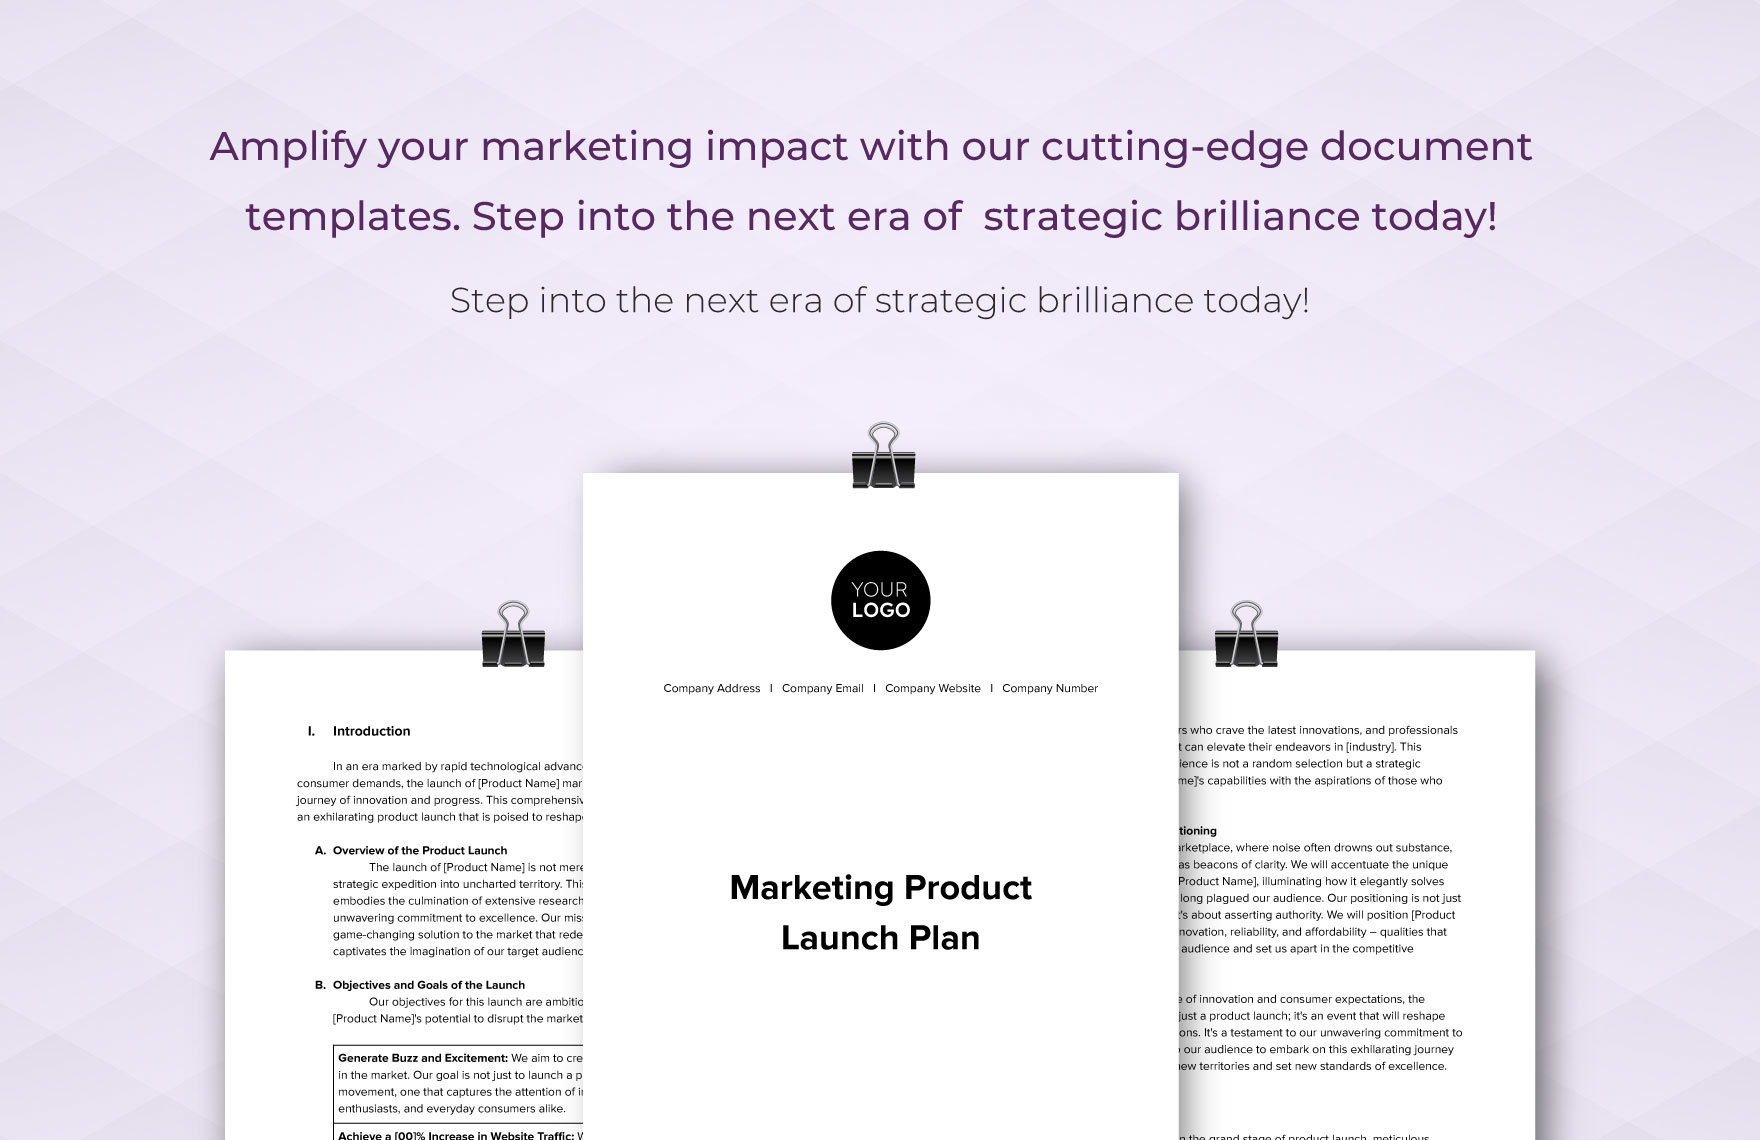 Marketing Product Launch Plan Template